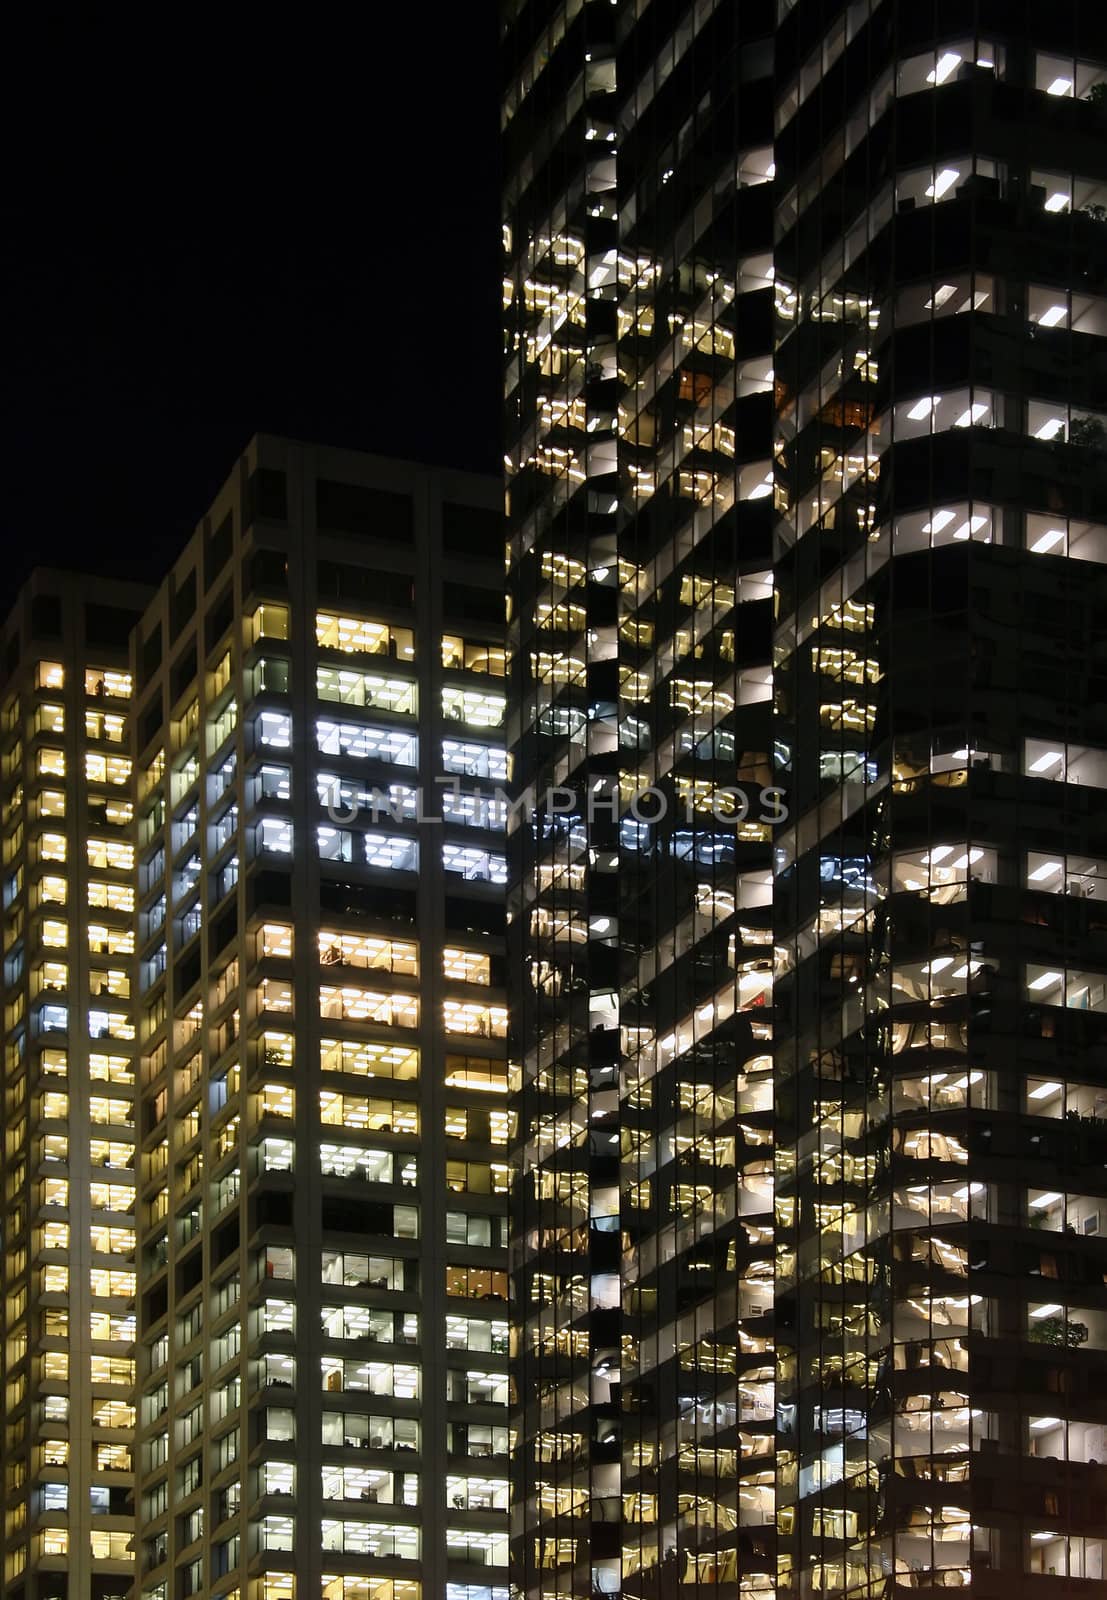 Modern city with high rises at night in Calgary, Canada